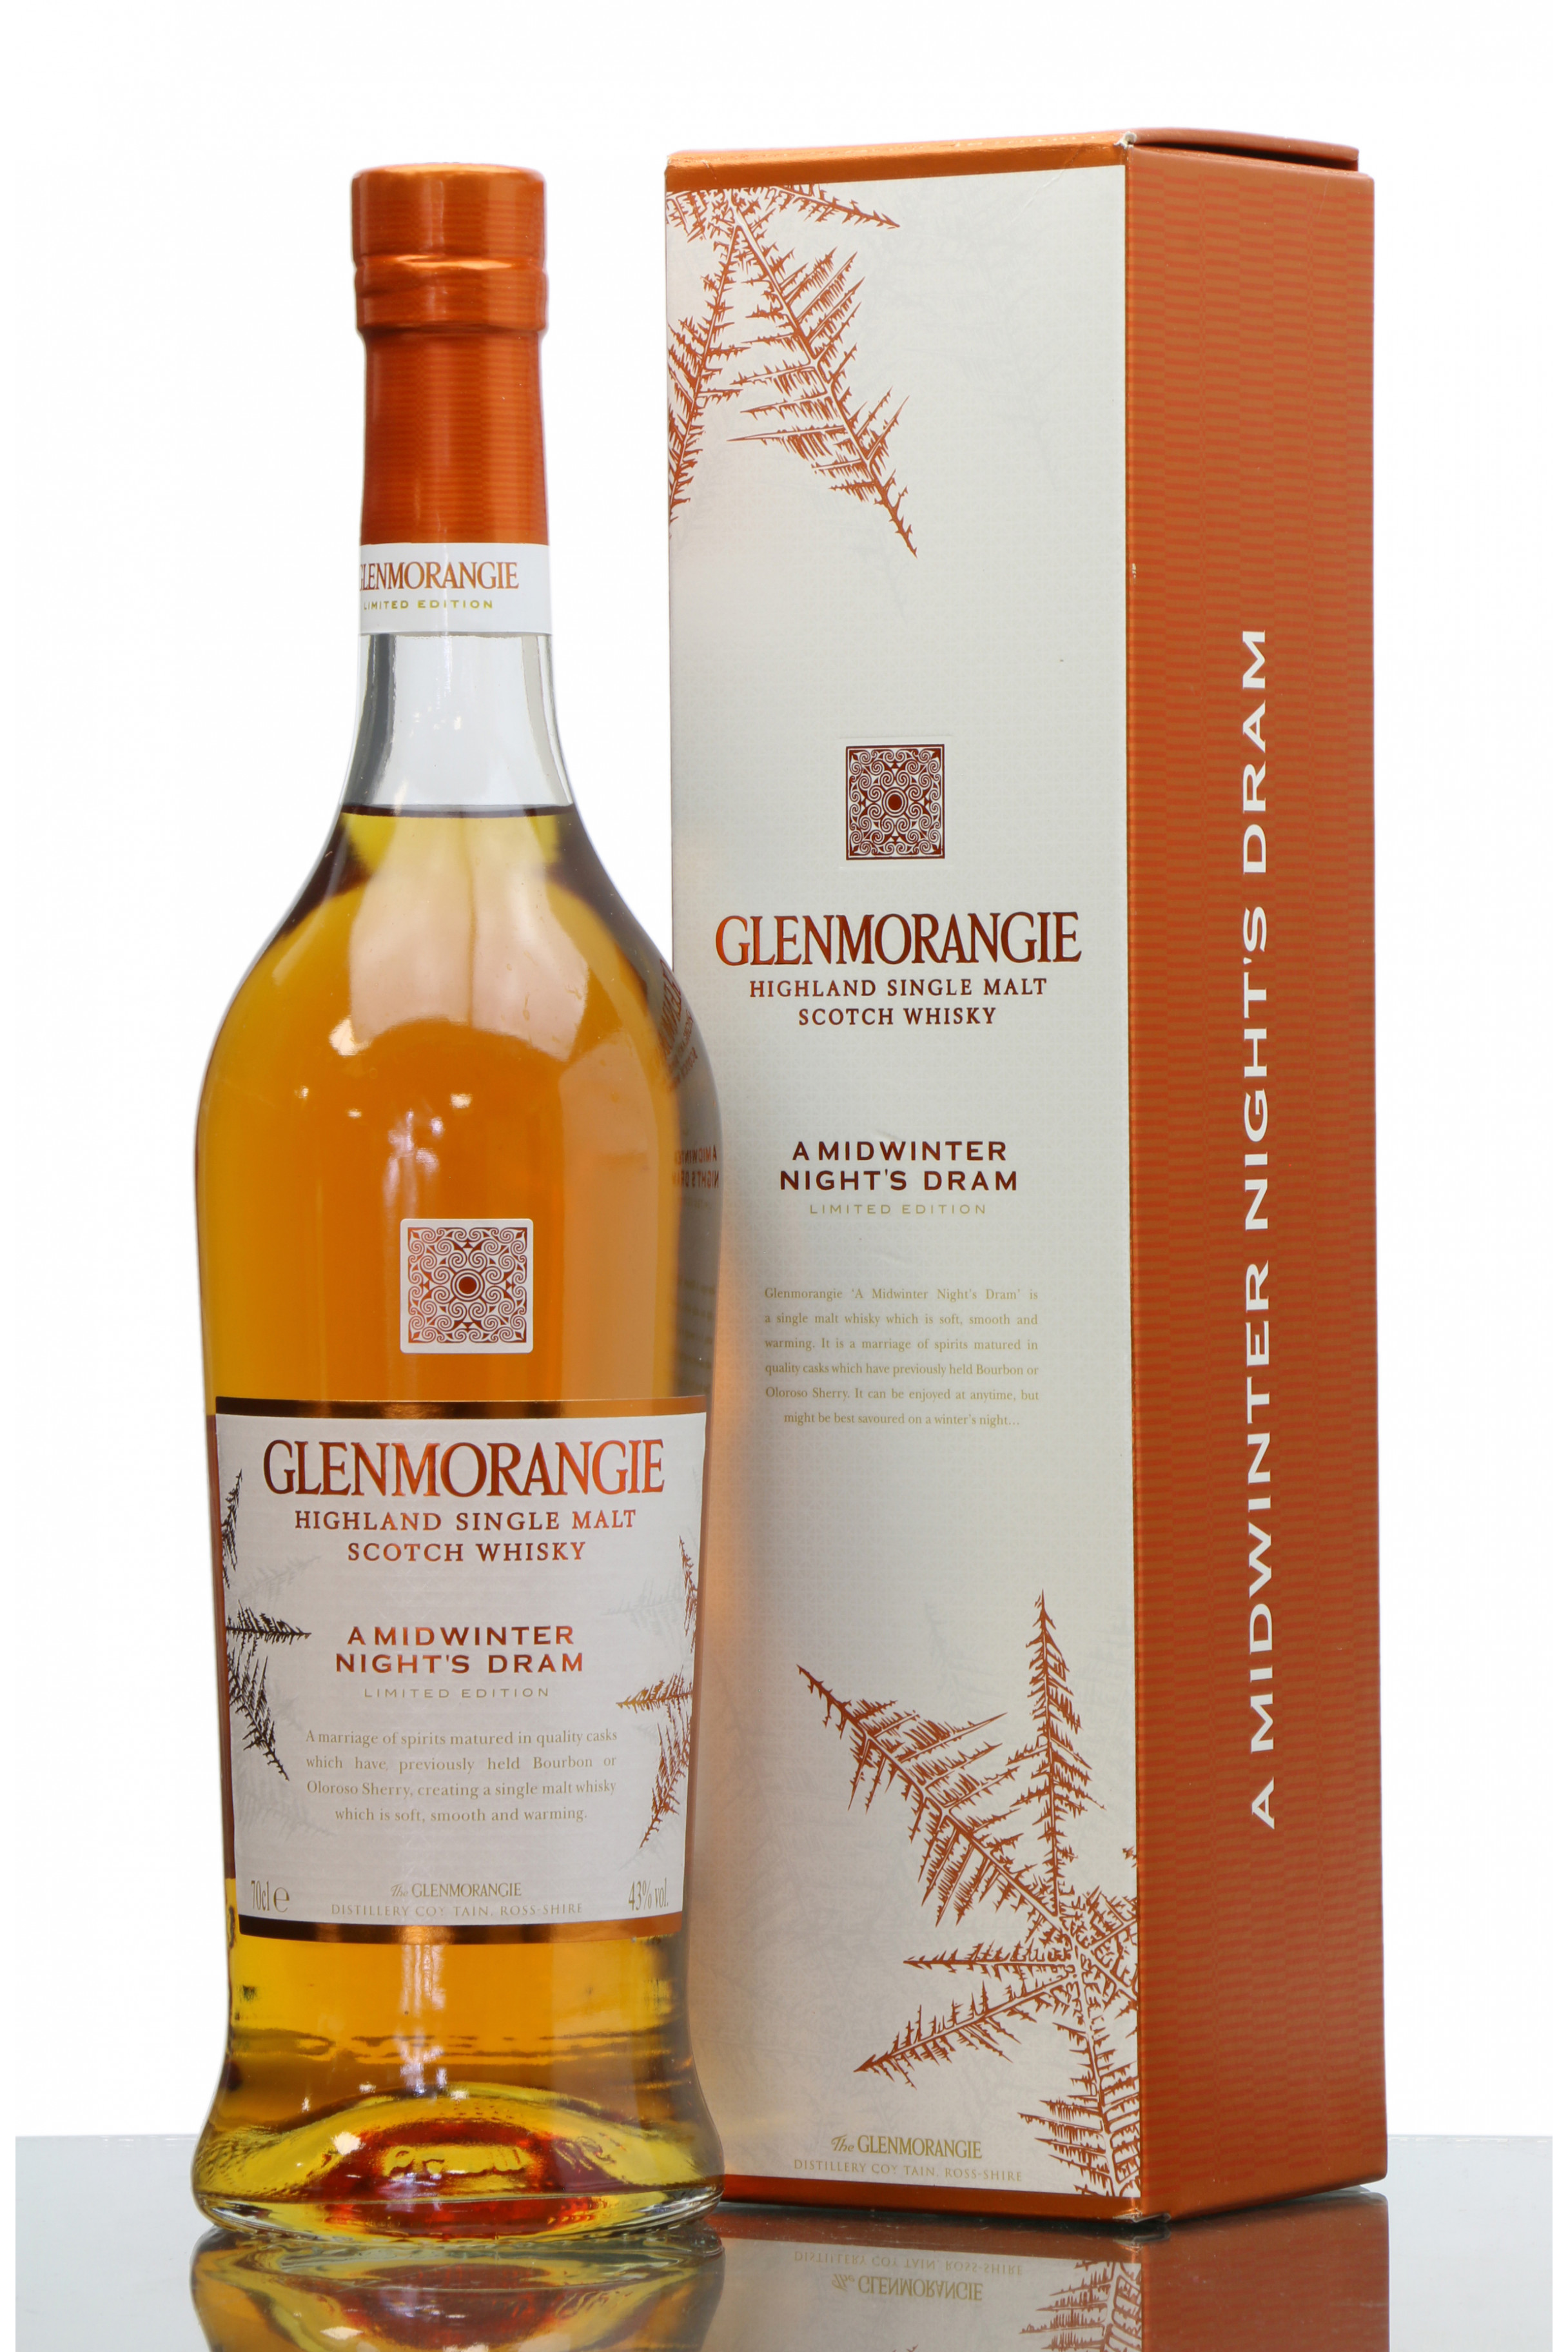 Glenmorangie A Midwinter Night's Dram Limited Edition Just Whisky